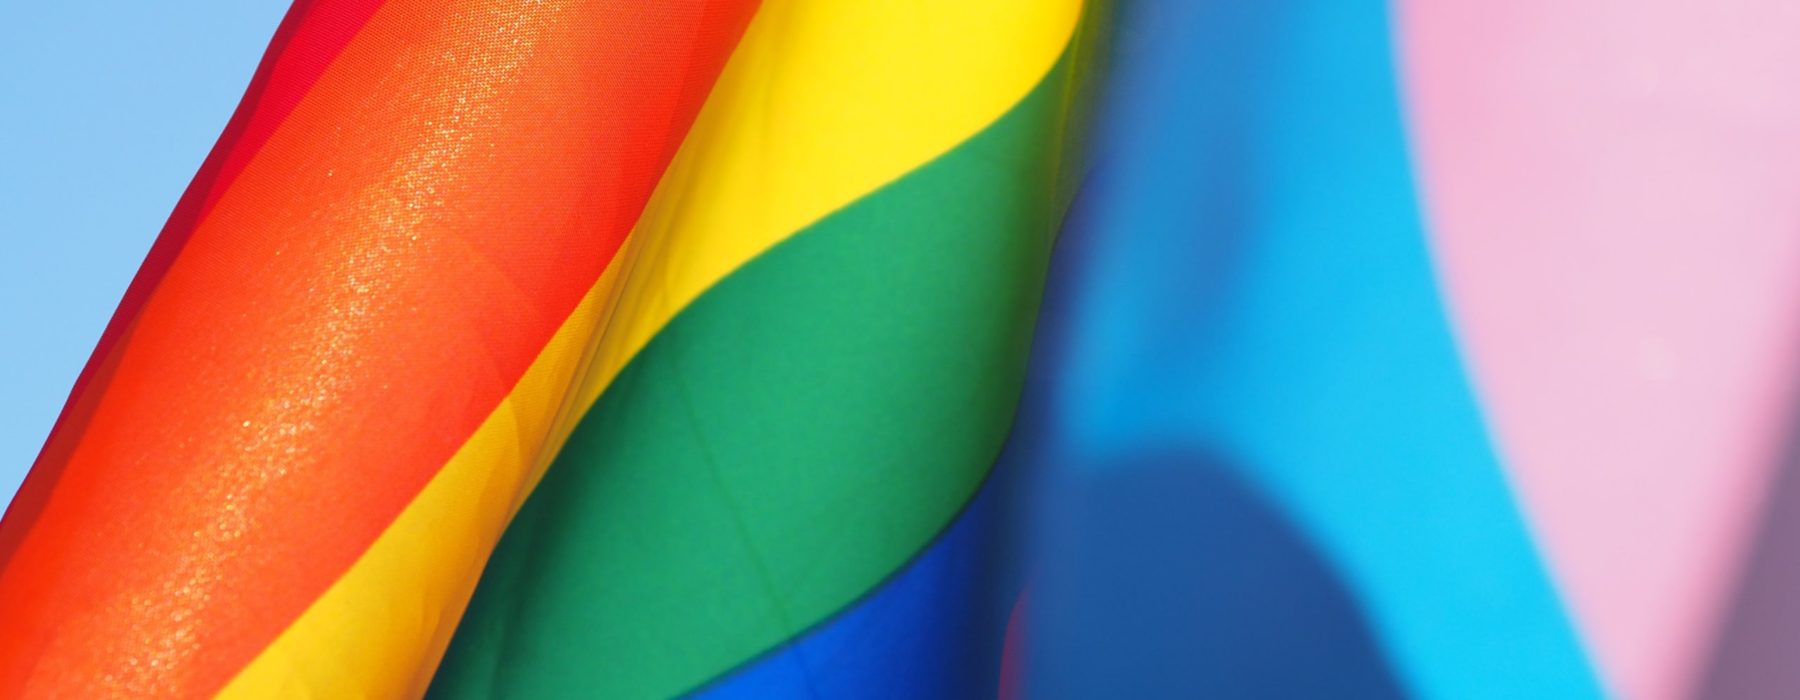 A close up of a pride rainbow flag with red, orange, yellow, green, pink and blue